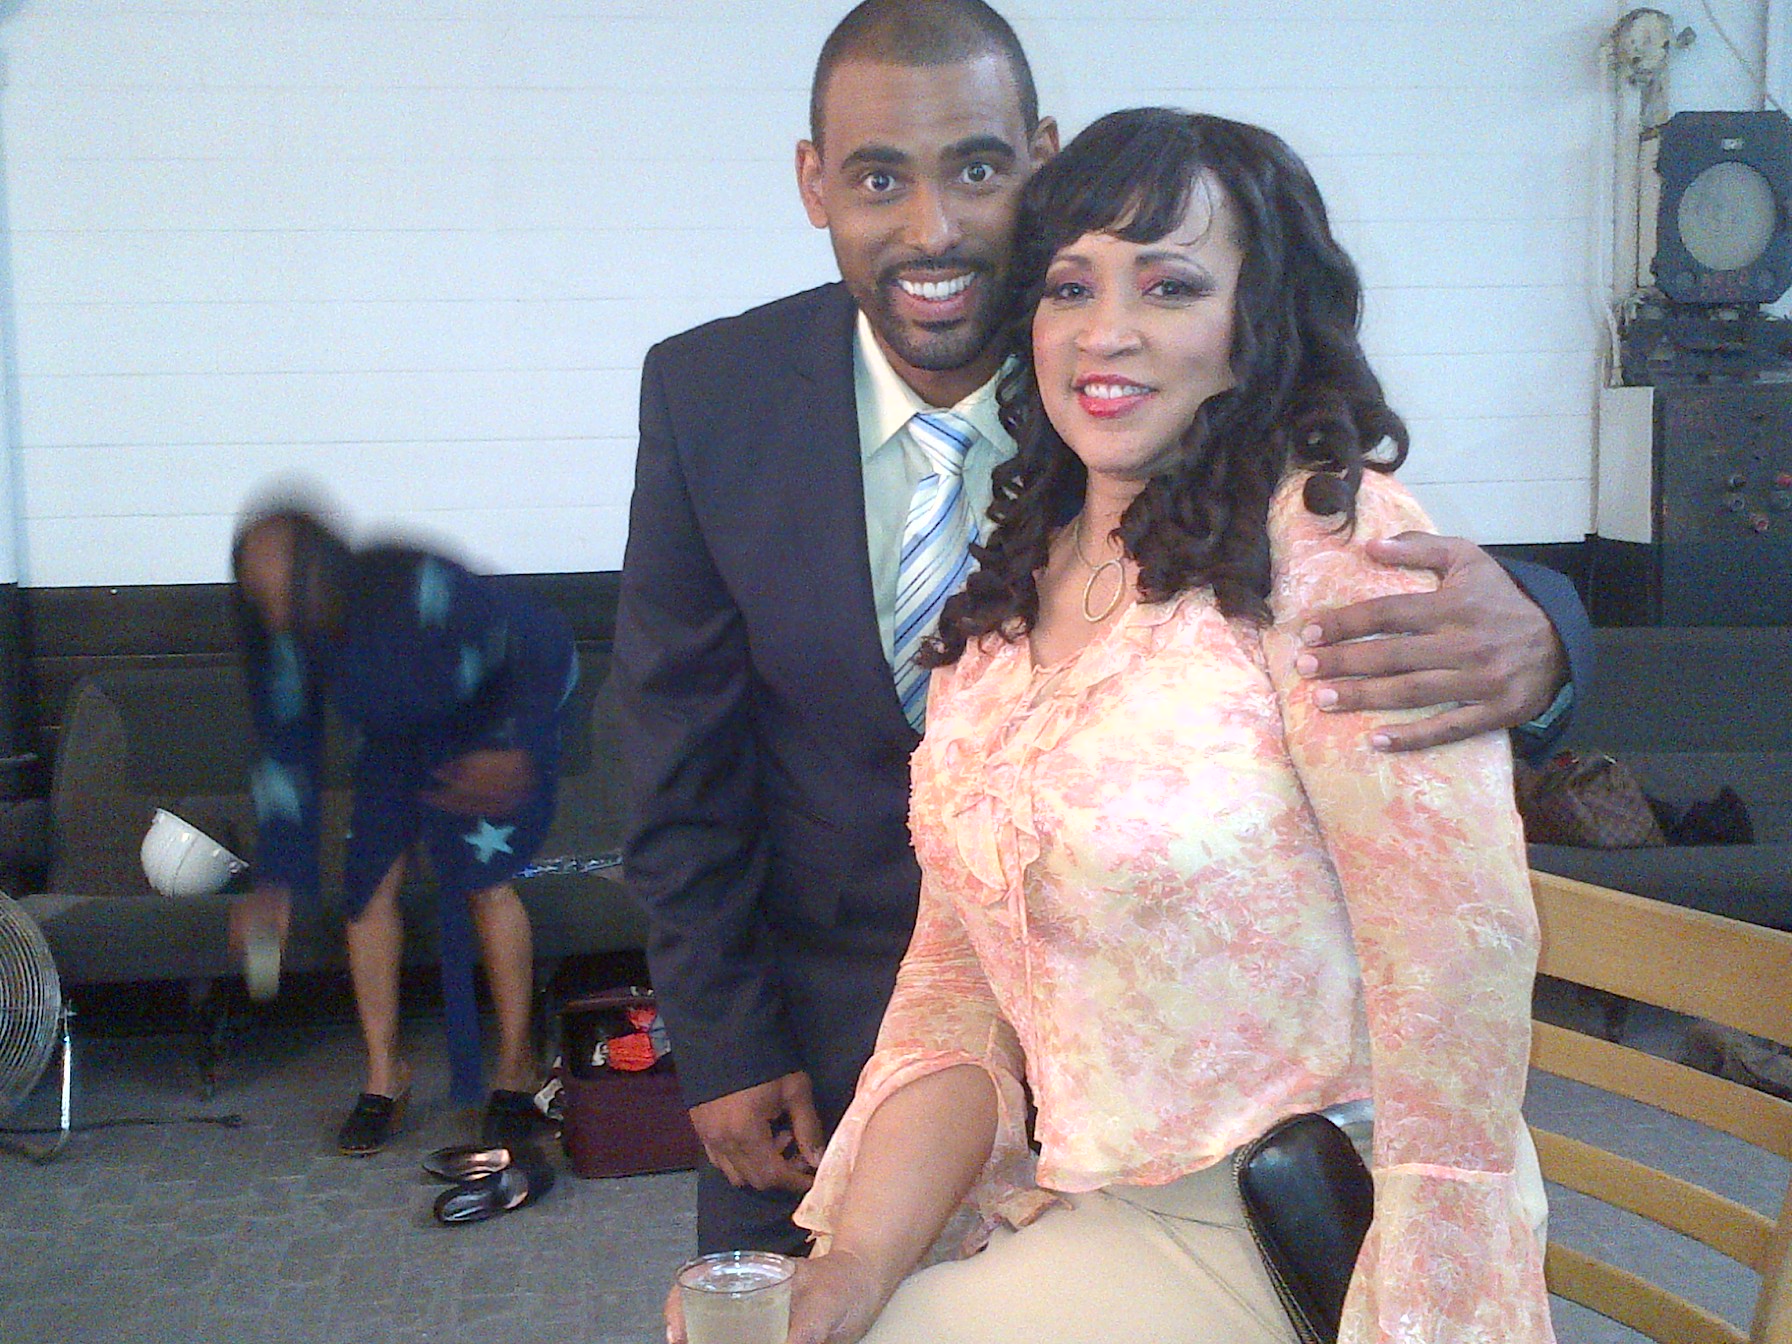 On set of 'Forbidden Woman' with Jackee Harry.